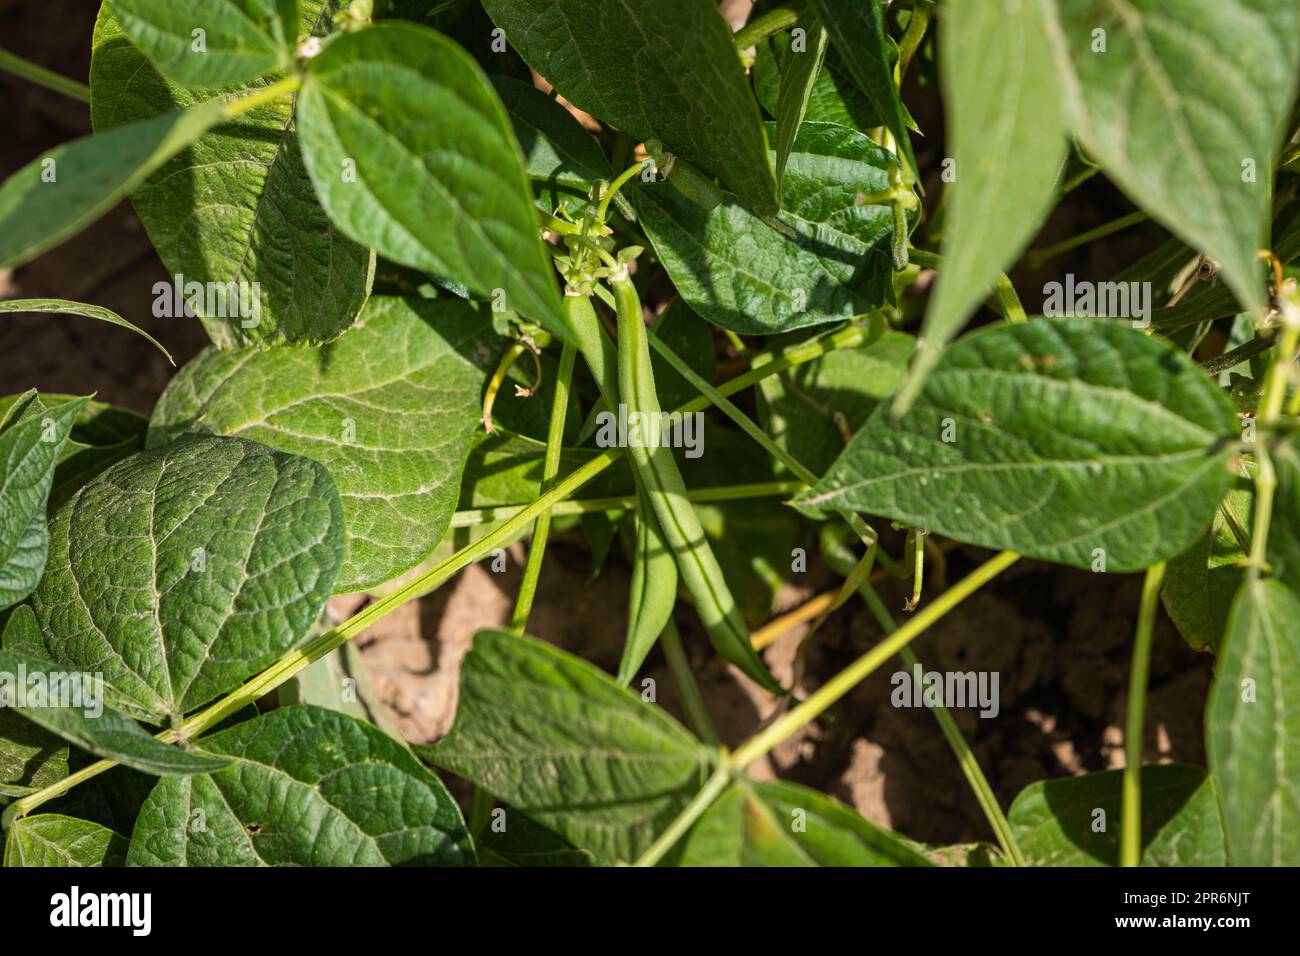 detail of beans growing Stock Photo